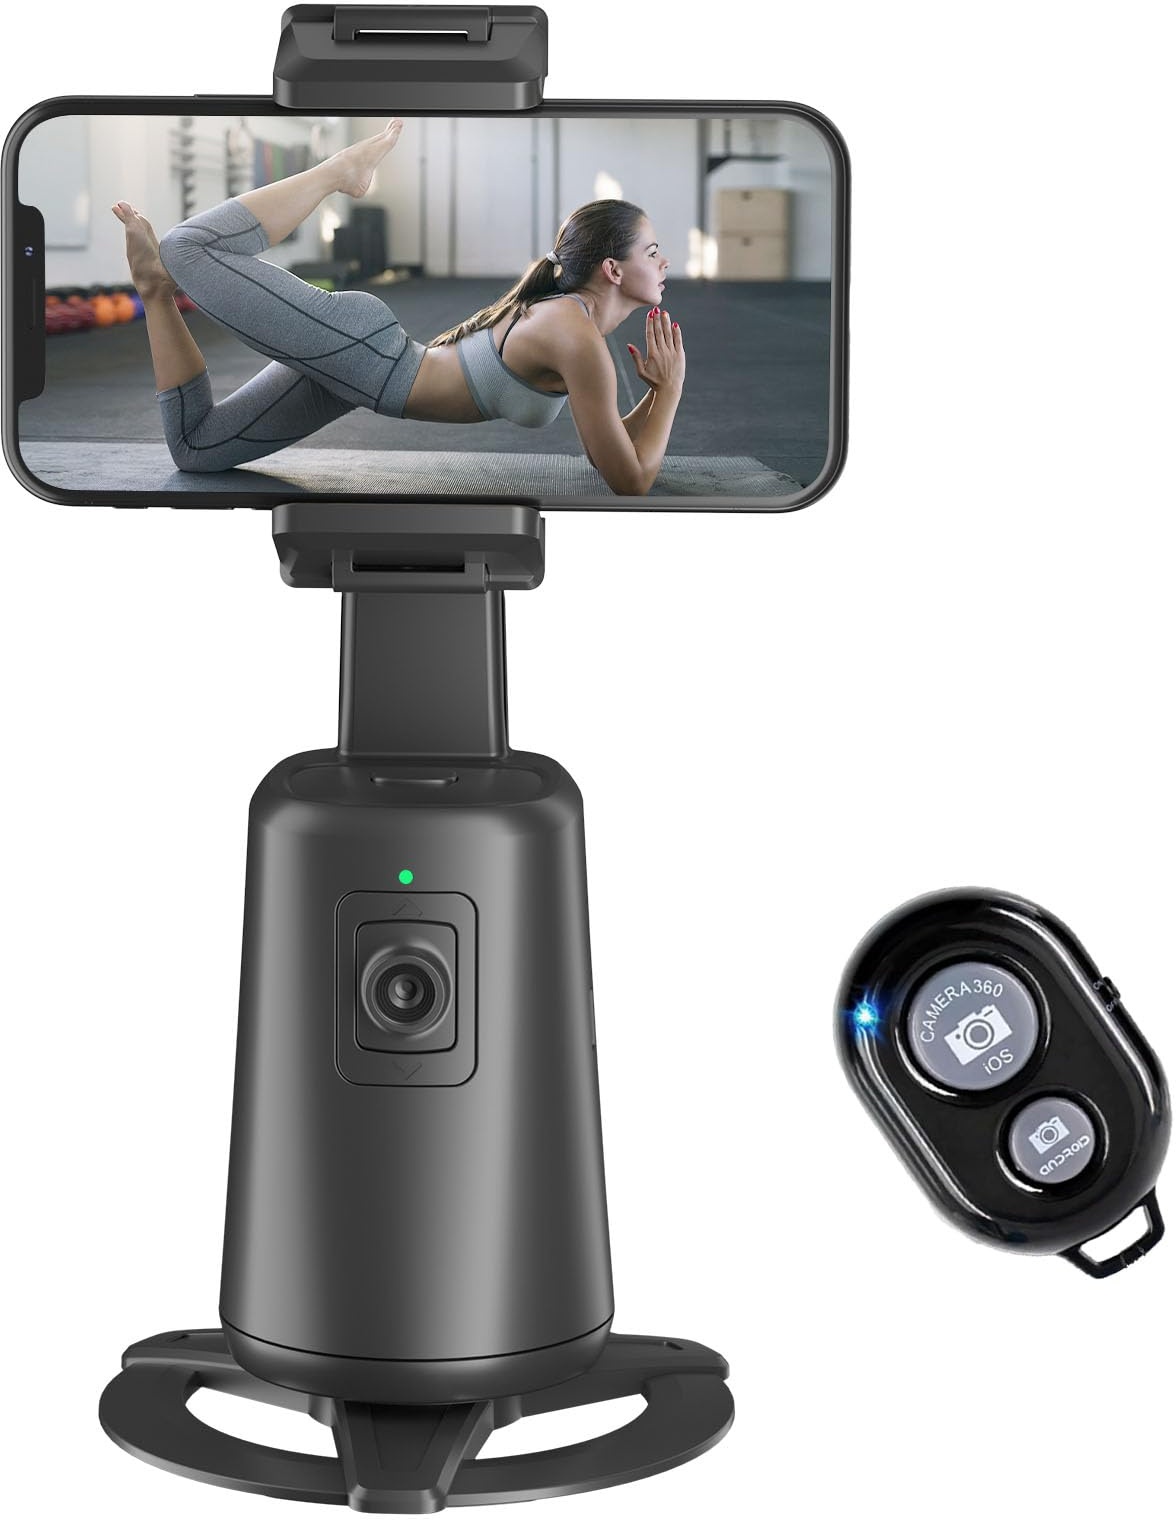 Auto Face Tracking Phone - 360° Rotation Auto Tracking Phone Holder No App, Phone Camera Mount with Remote and Gesture Control